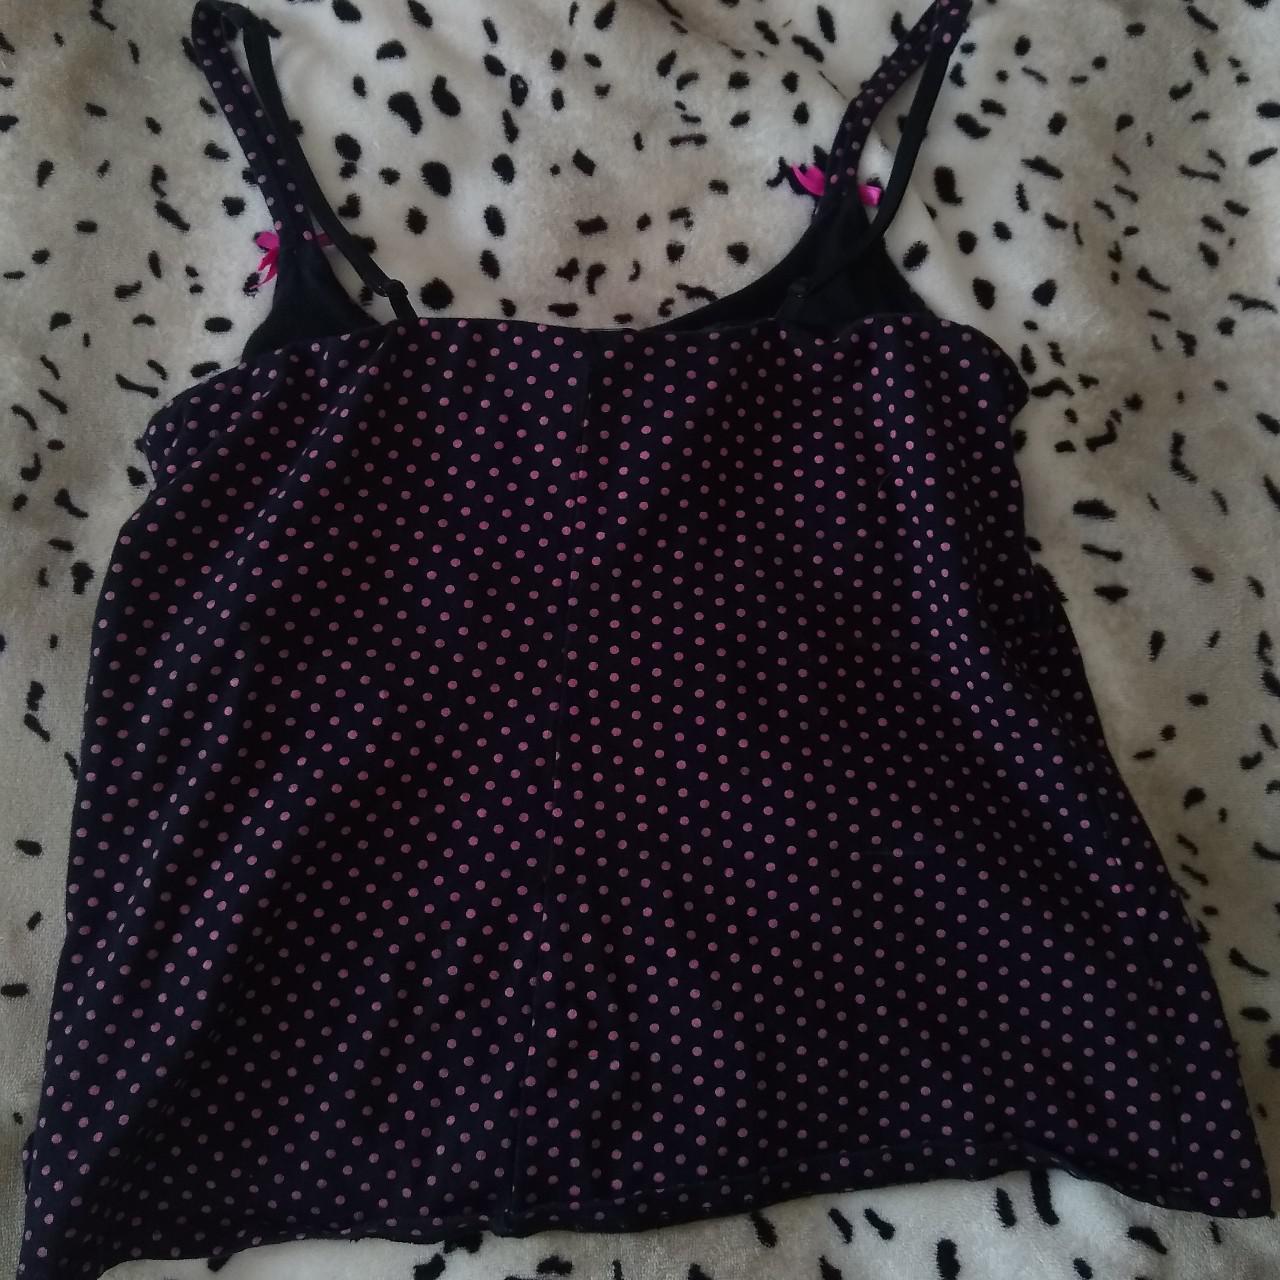 Product Image 4 - Vintage Betsey Johnson camisole. Covered